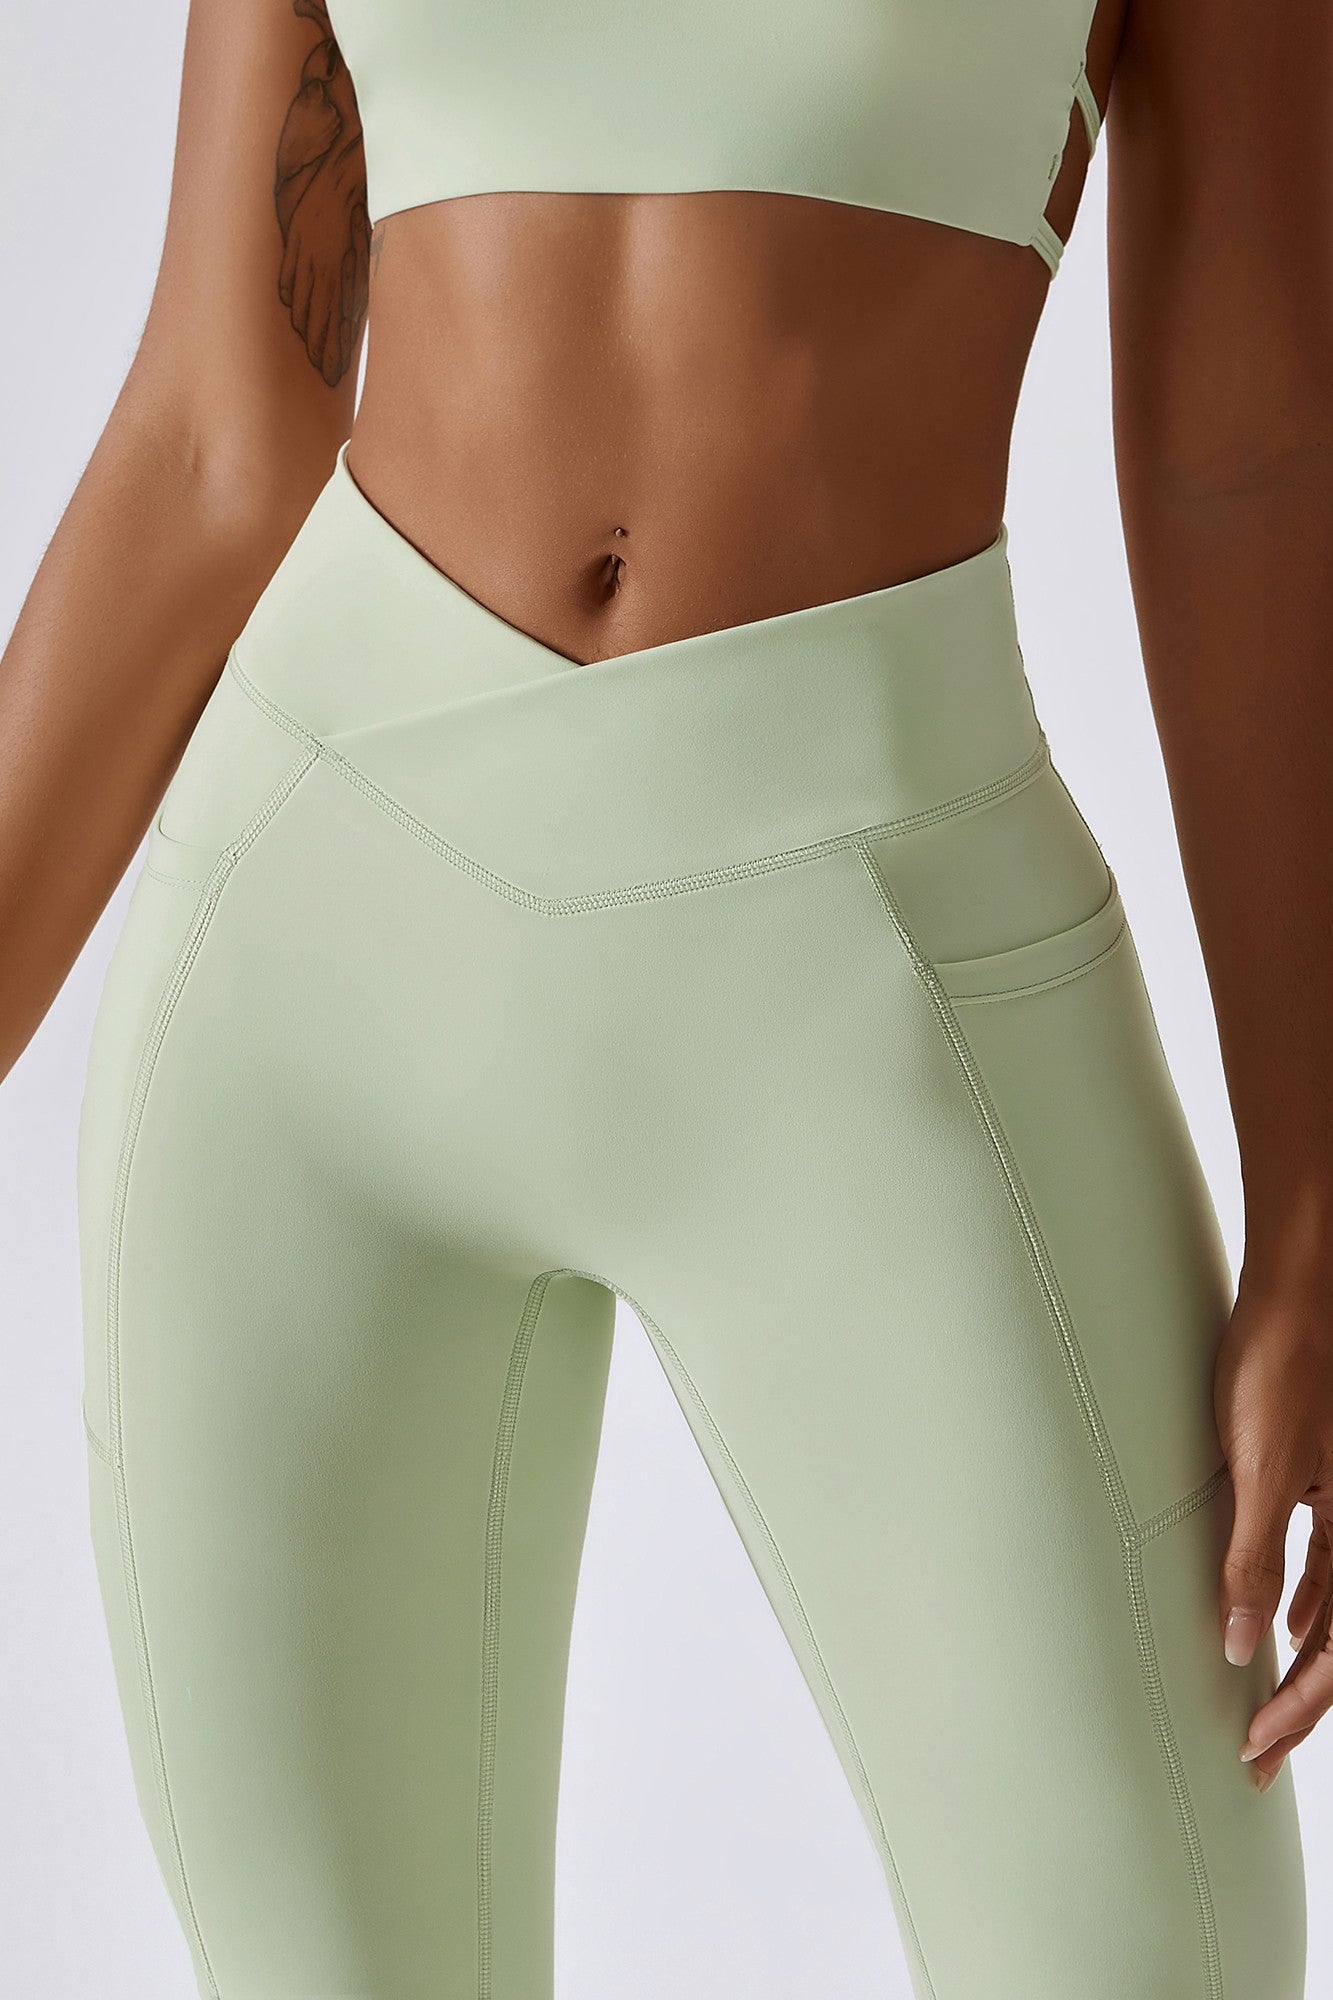  Vertvie Green Leggings with Pockets Crossover Waist Leggings for  Women Butt Booty Lifting V Waist Yoga Pants Tummy Control Gym Running Non  See-Through Legging S : Clothing, Shoes & Jewelry